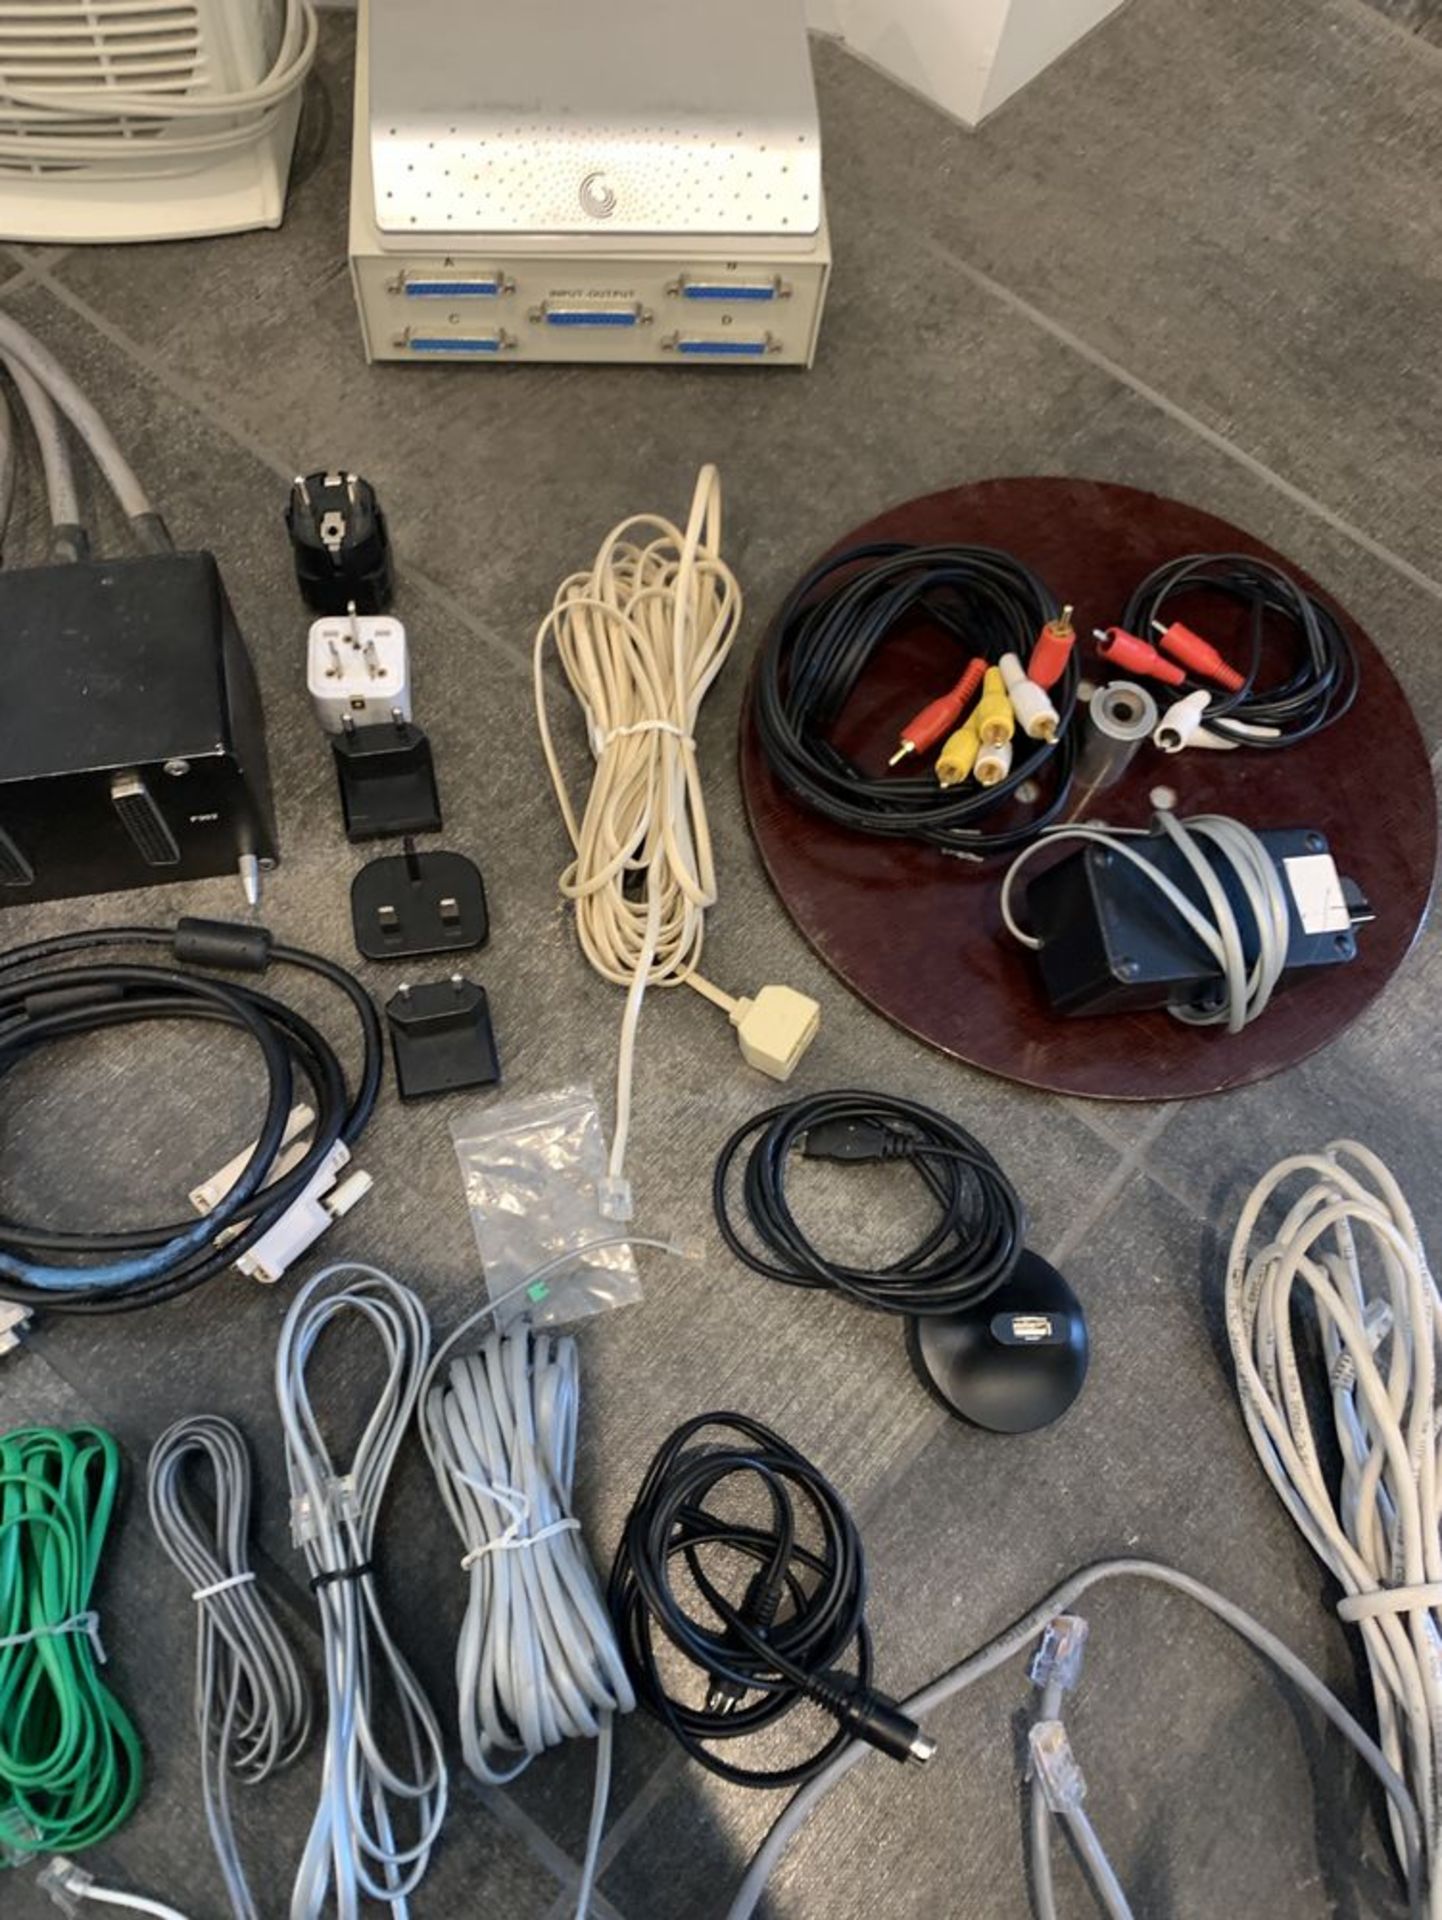 LARGE MIXED LOT OF ELECTRONICS, COMPUTER ITEMS CABLES AND MORE - Image 6 of 7